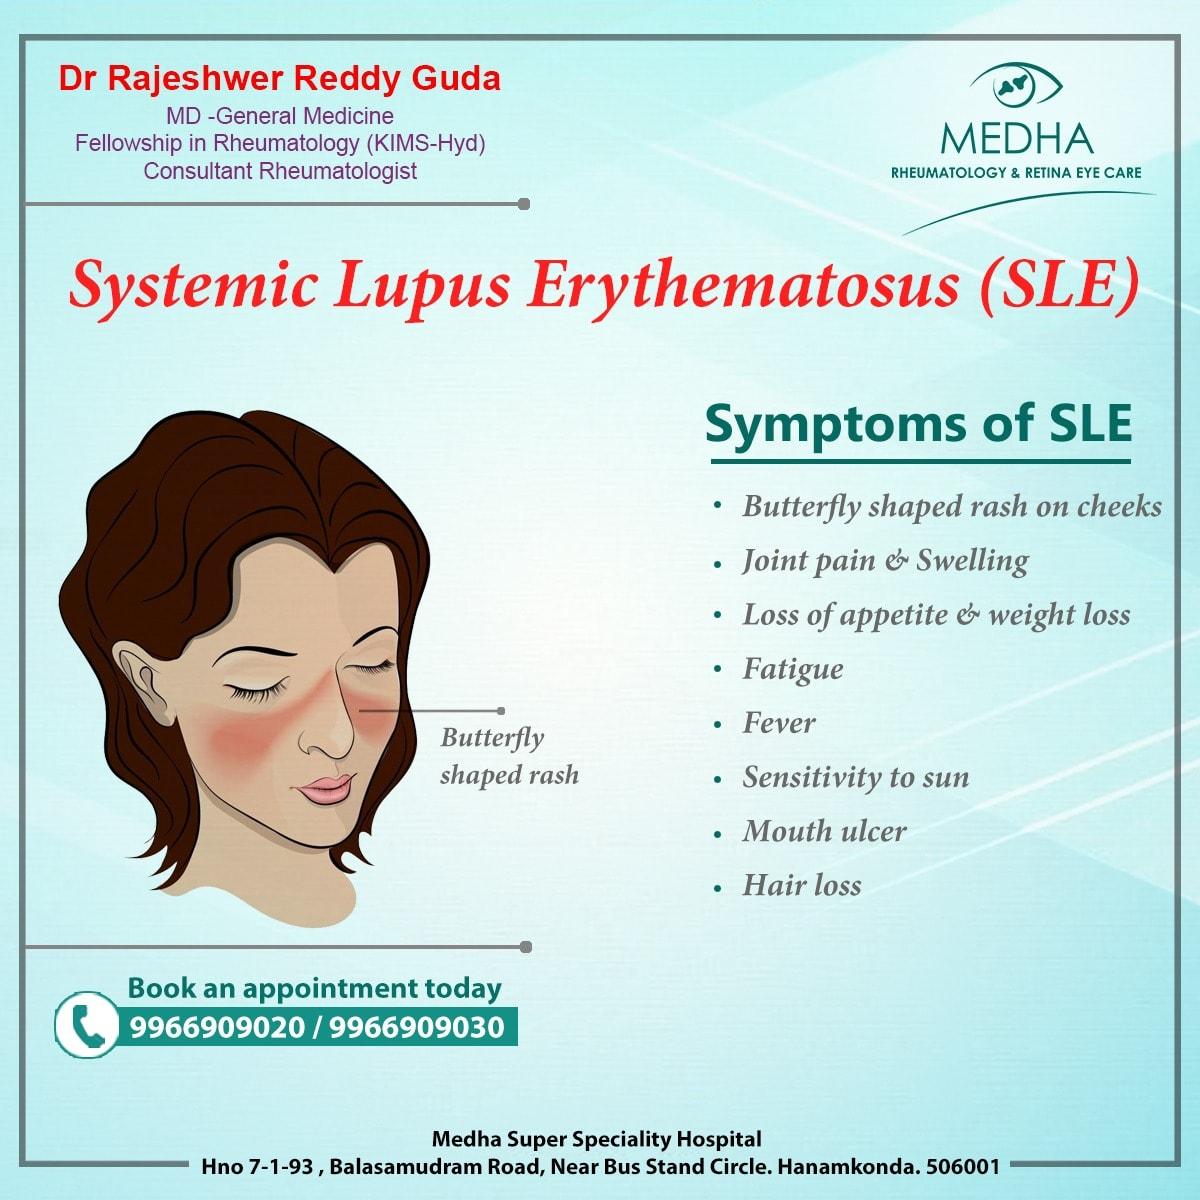 SLE is a chronic disease that can have phases of worsening symptoms